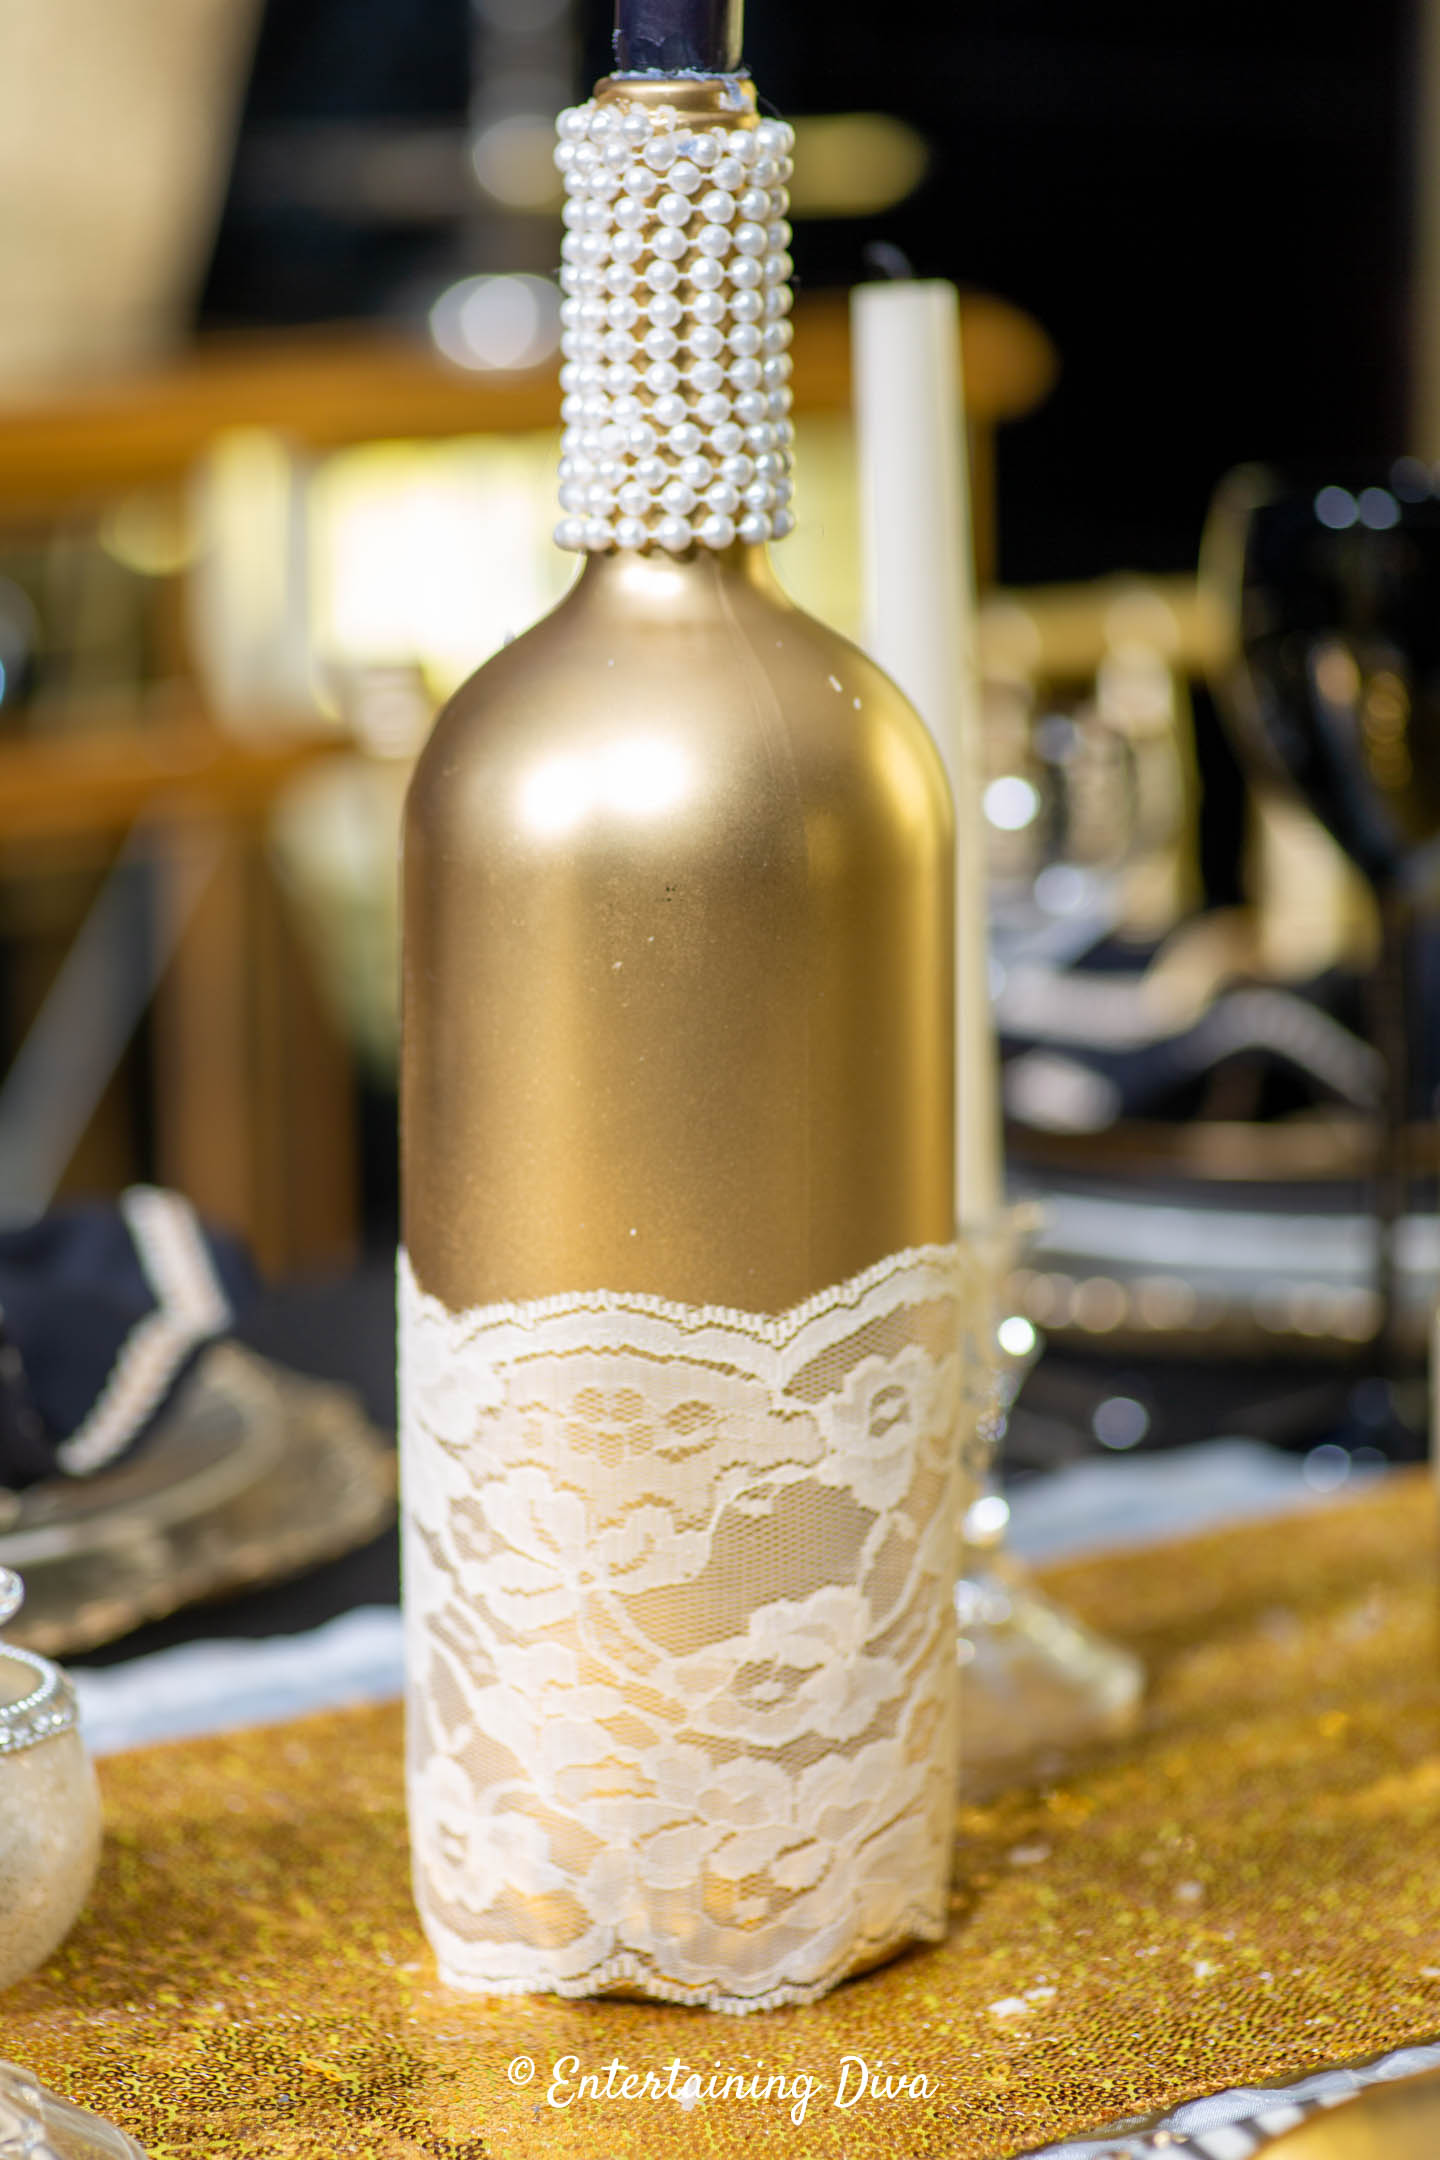 Decorated gold wine bottle with white lace around the bottom and pearls around the neck